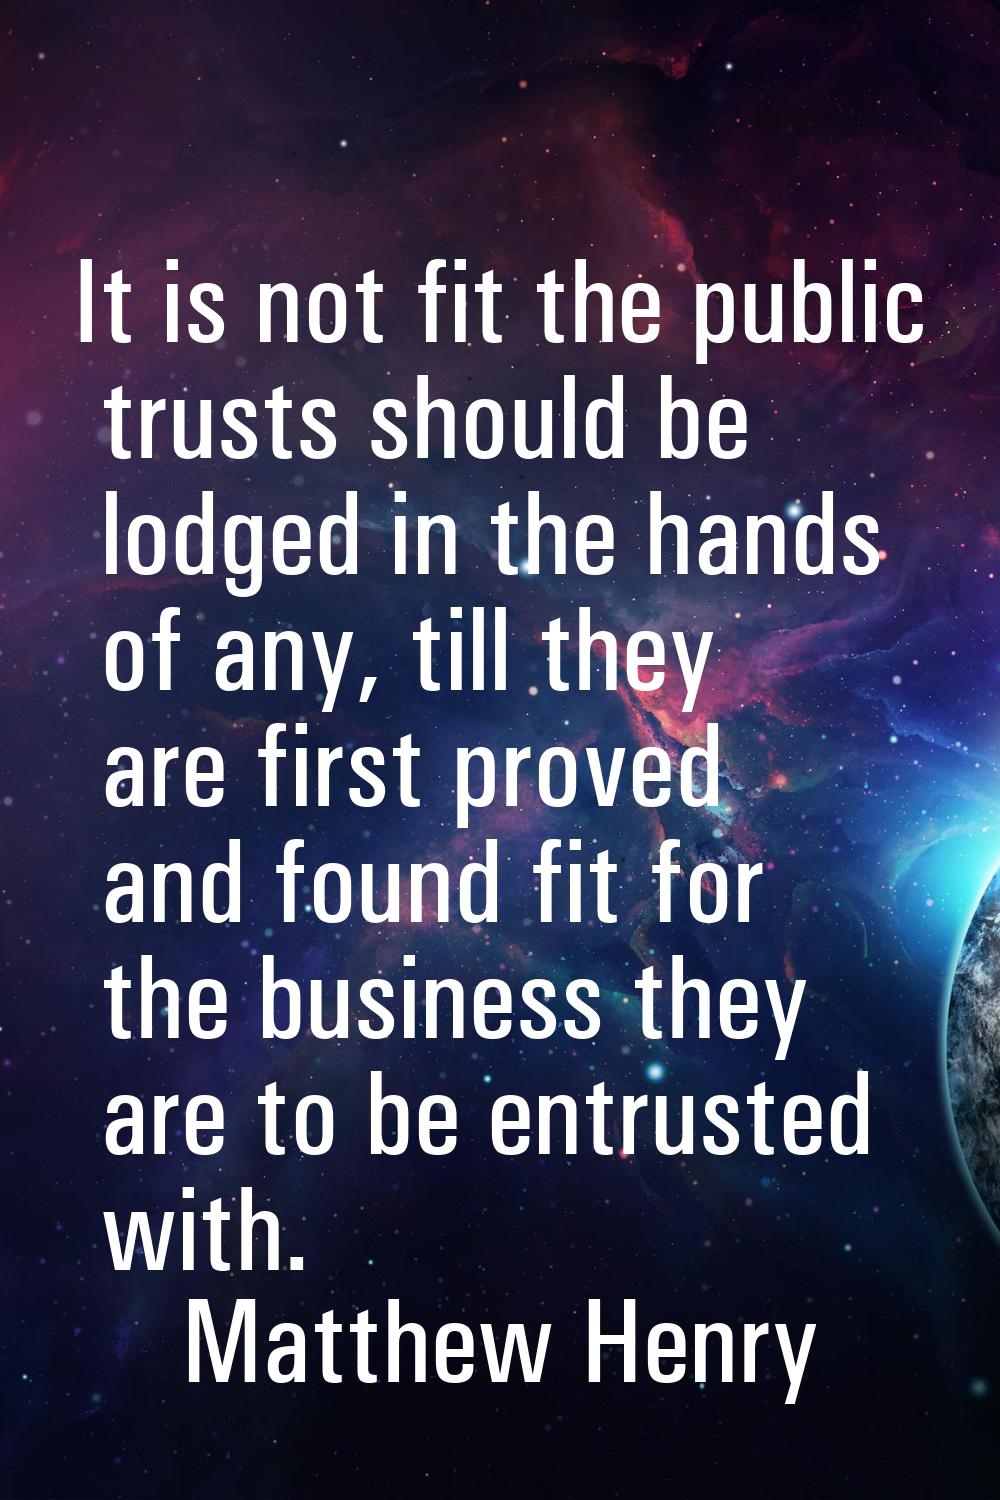 It is not fit the public trusts should be lodged in the hands of any, till they are first proved an